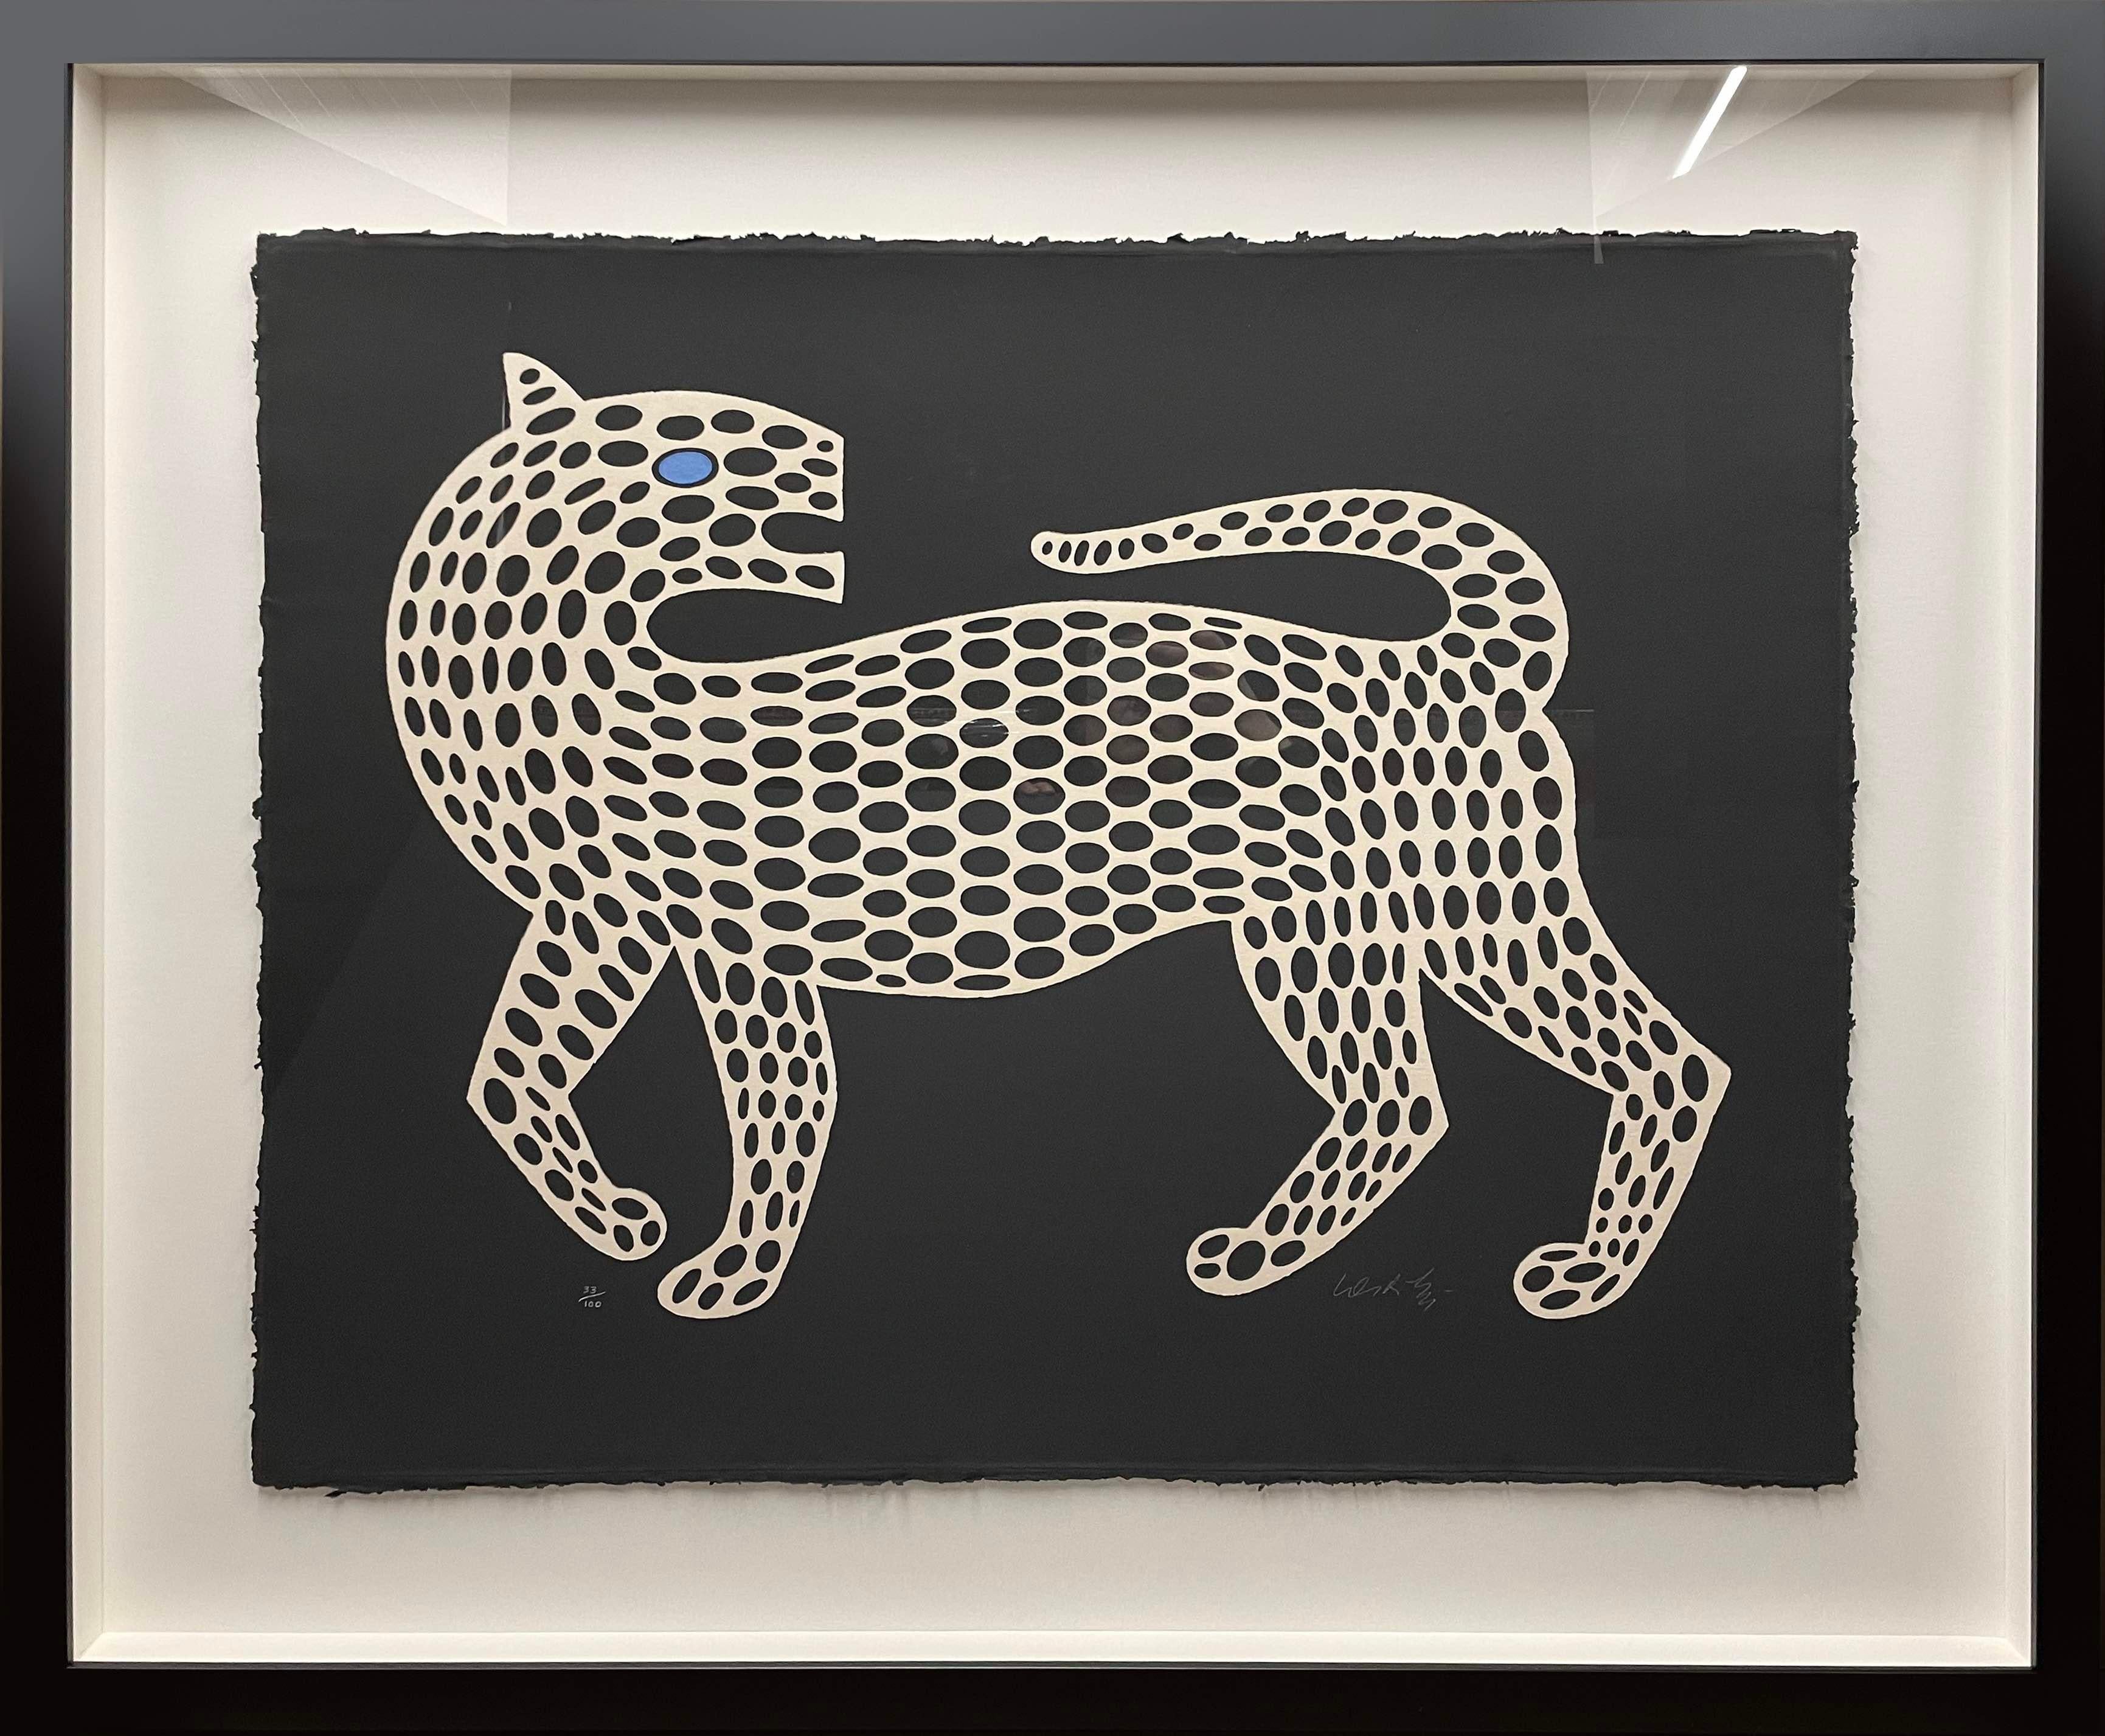 Victor Vasarely                                
(1906 – 1997)

The Leopard
(Leau – 1)

Serigraph in colors on handmade black paper, c.1990
Sheet size: 32” x 39” full margins 
Signed and numbered 33/100 in pencil, lower margin. 


		Vasarely’s